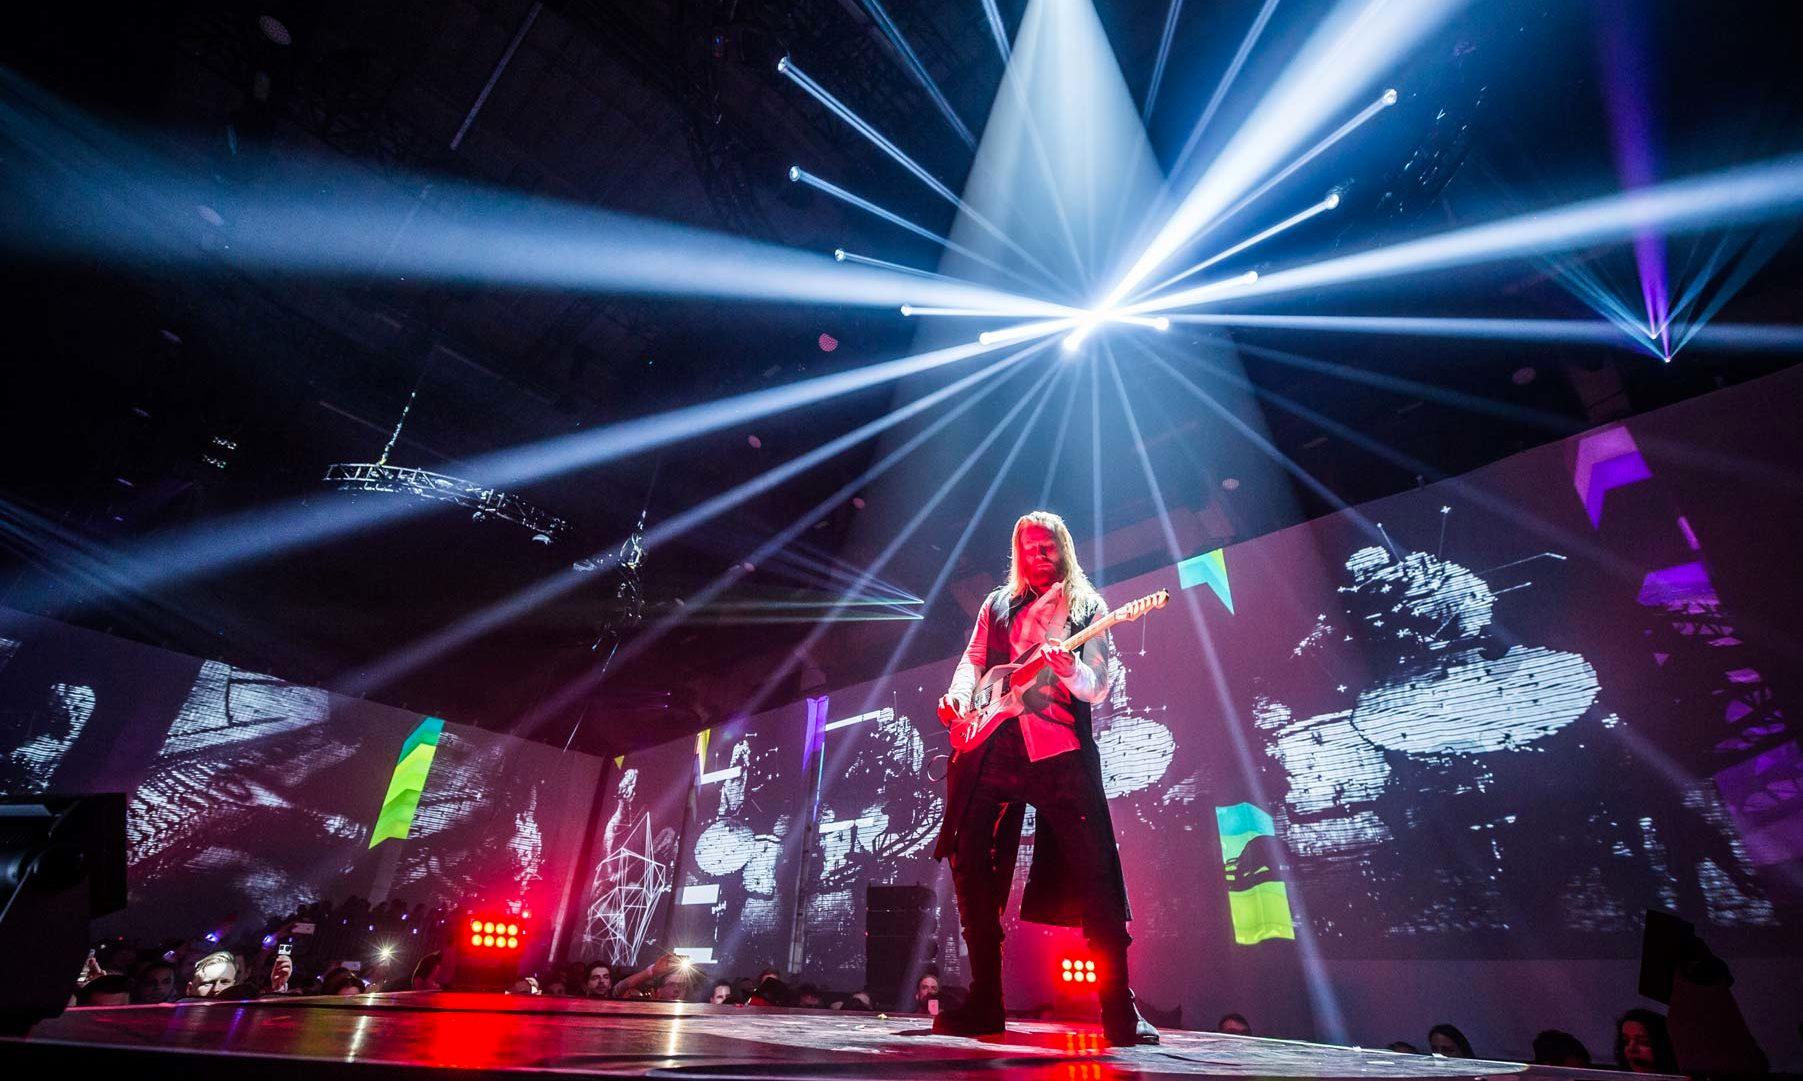 A guitarist plays on stage surrounded by video mapping and spotlights in a club environment.